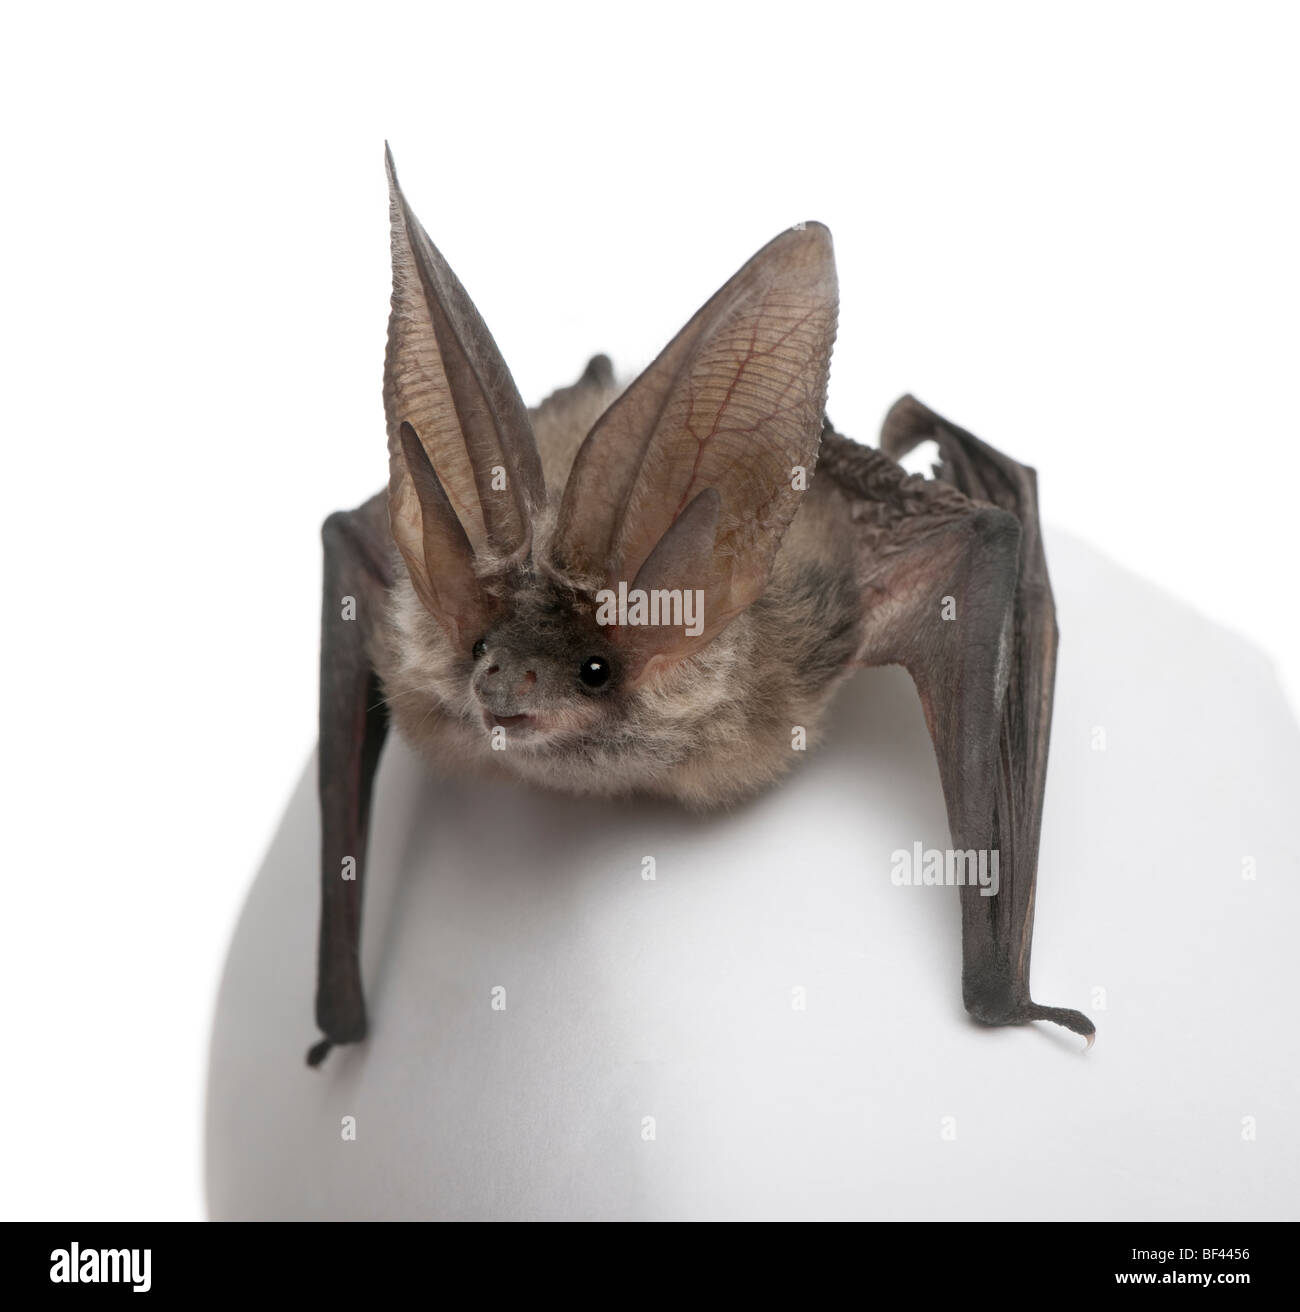 Grey long-eared bat, Plecotus astriacus, in front of white background, studio shot Stock Photo